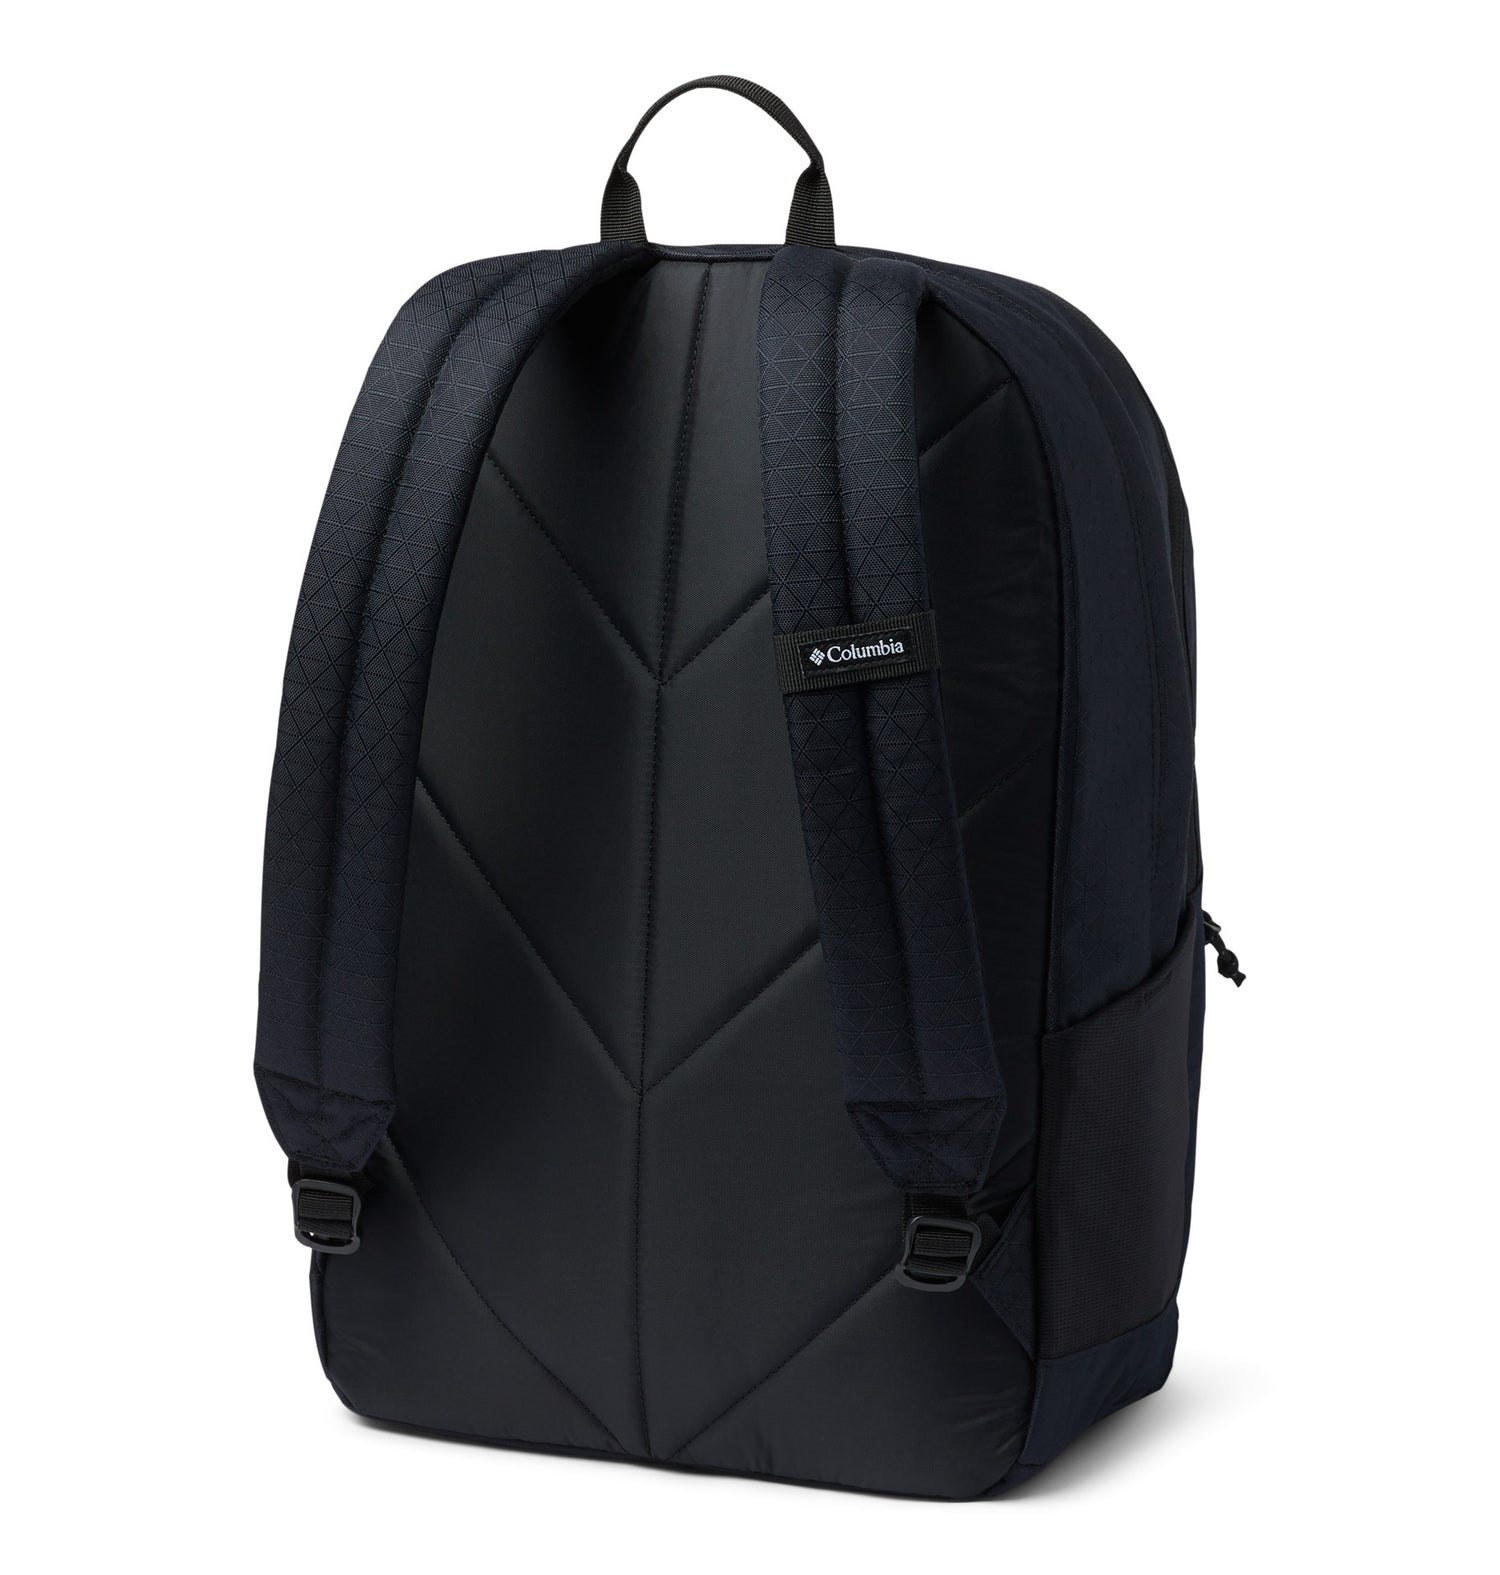 Angle view of a black backpack called Zig Zag designed by Columbia showing its a top handle, and shoulder straps and back panel. with the logo printed on one of them.